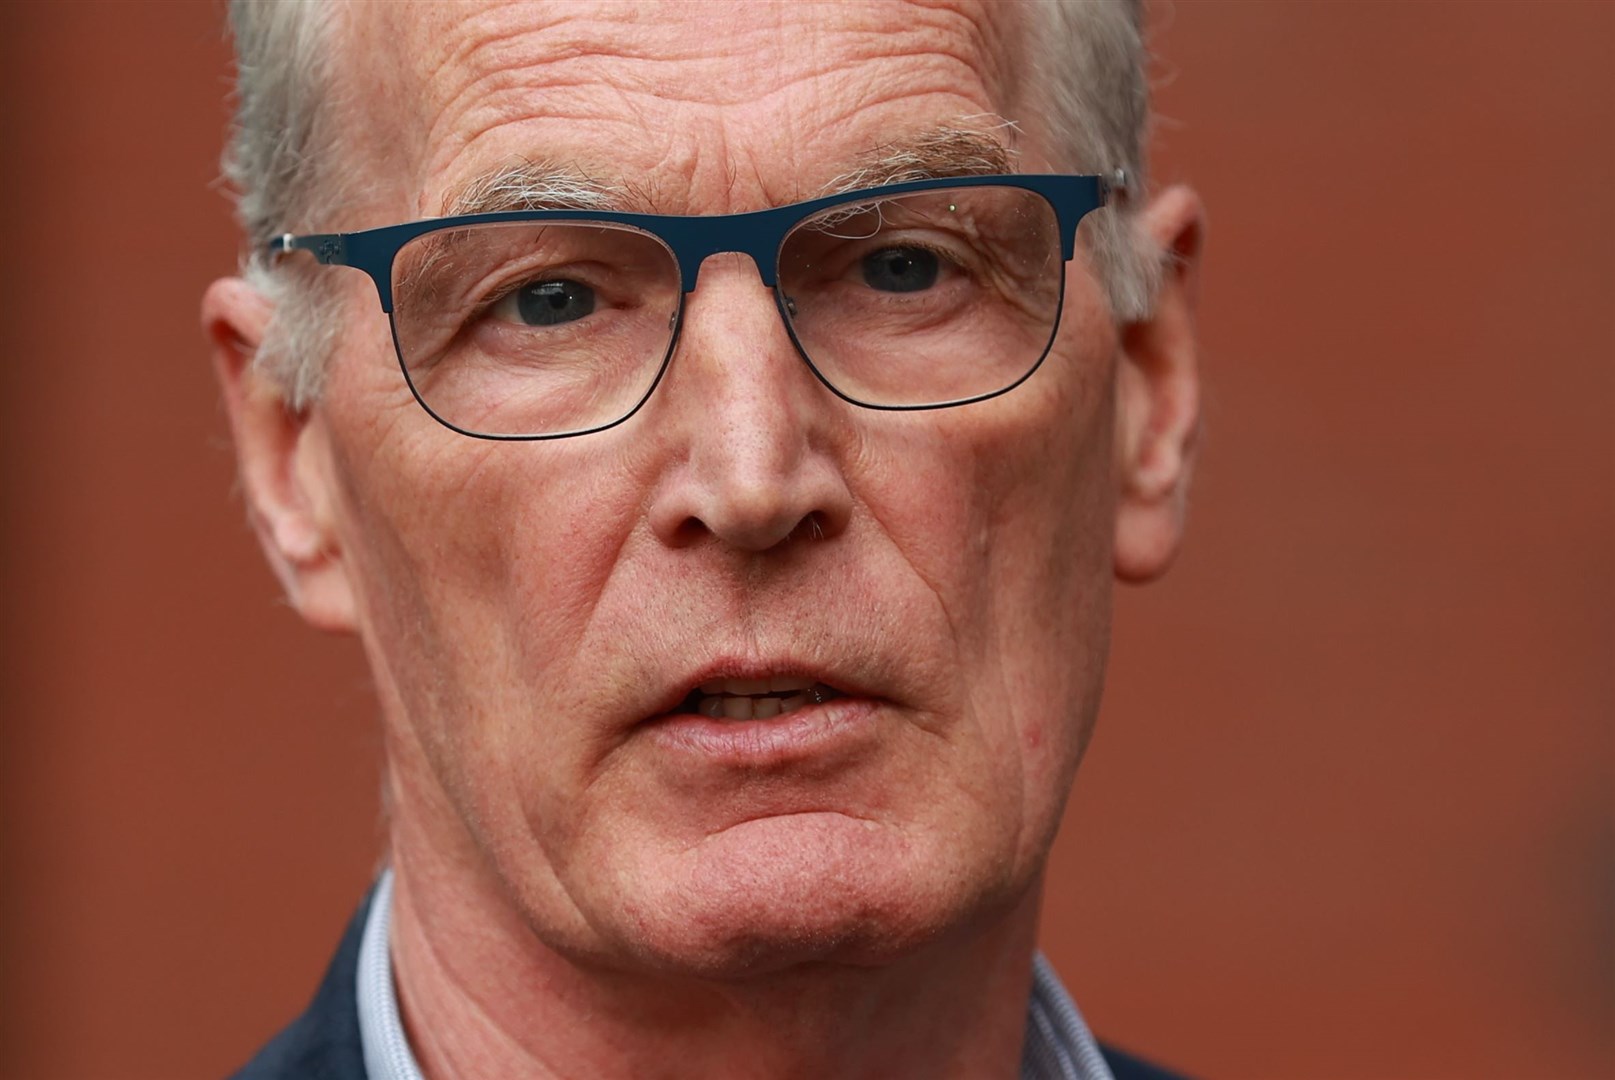 Sinn Fein MLA Gerry Kelly speaks to the media following a meeting in Belfast to discuss the recruitment of a new chief constable for the Police Service of Northern Ireland. (Liam McBurney/PA)